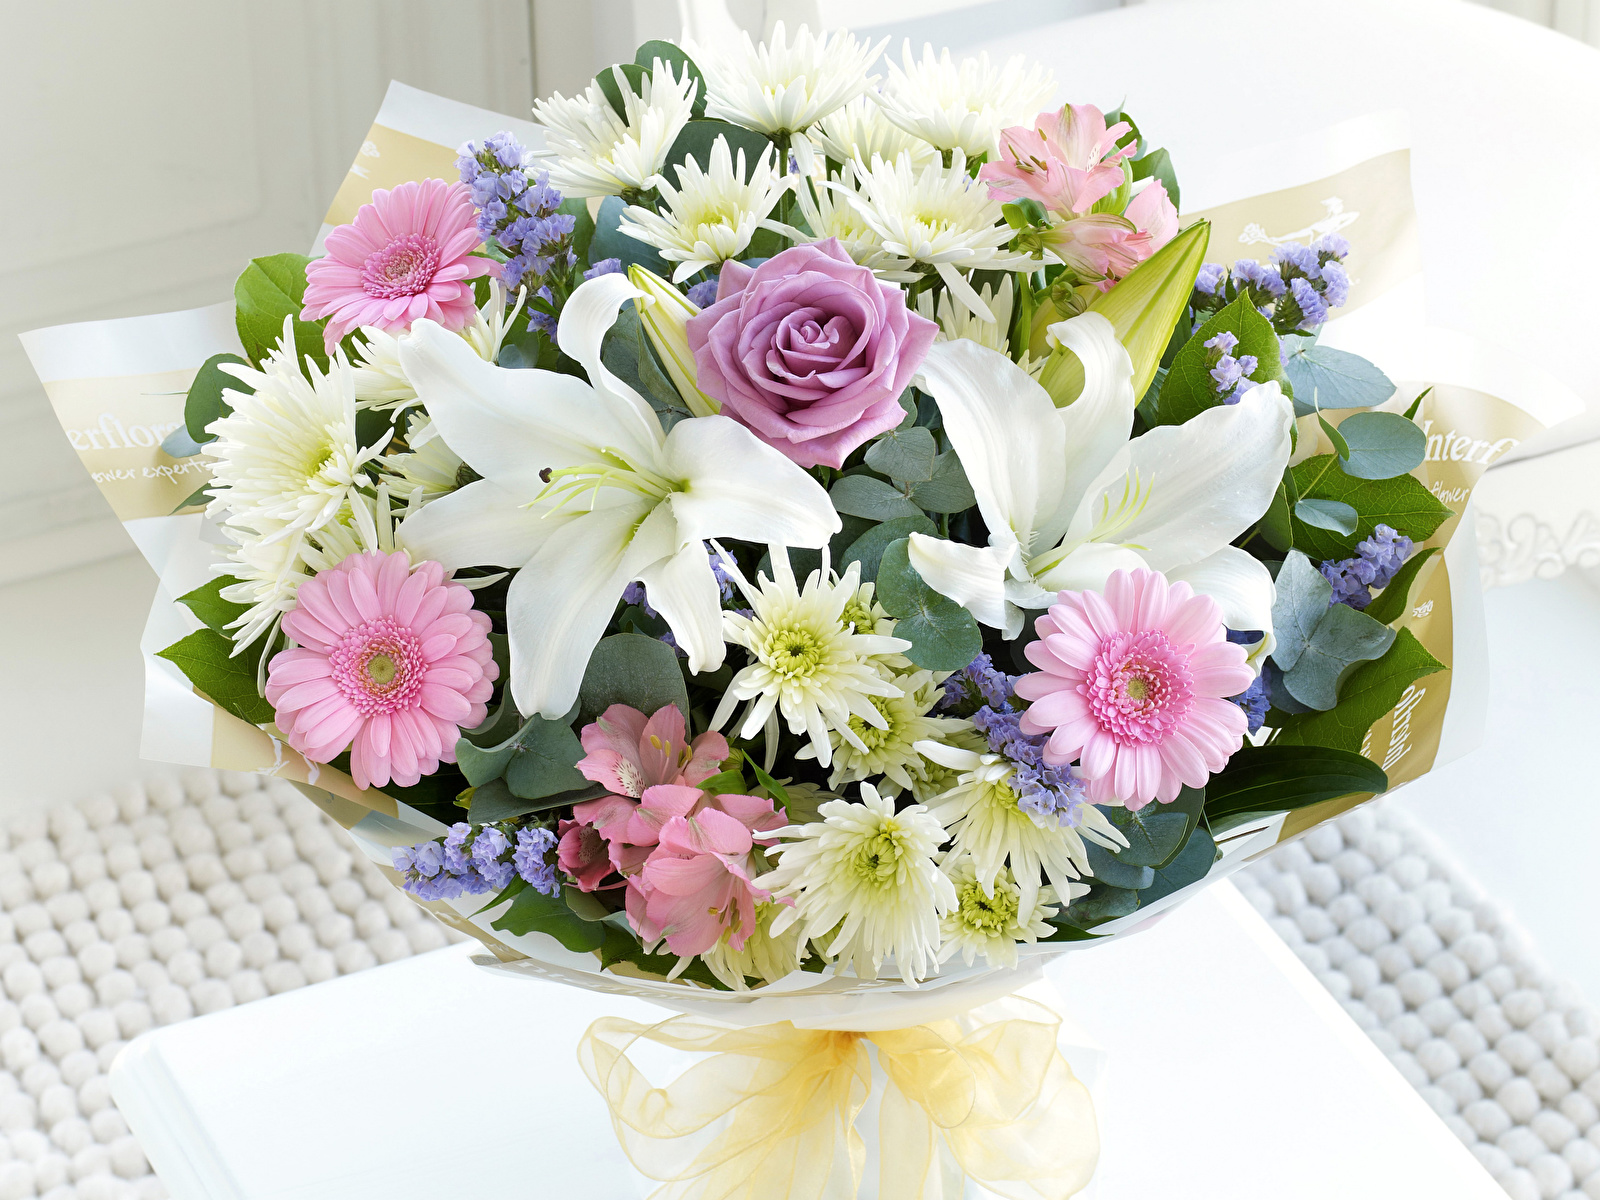 send-flowers-philippines-colored-flowers-mix